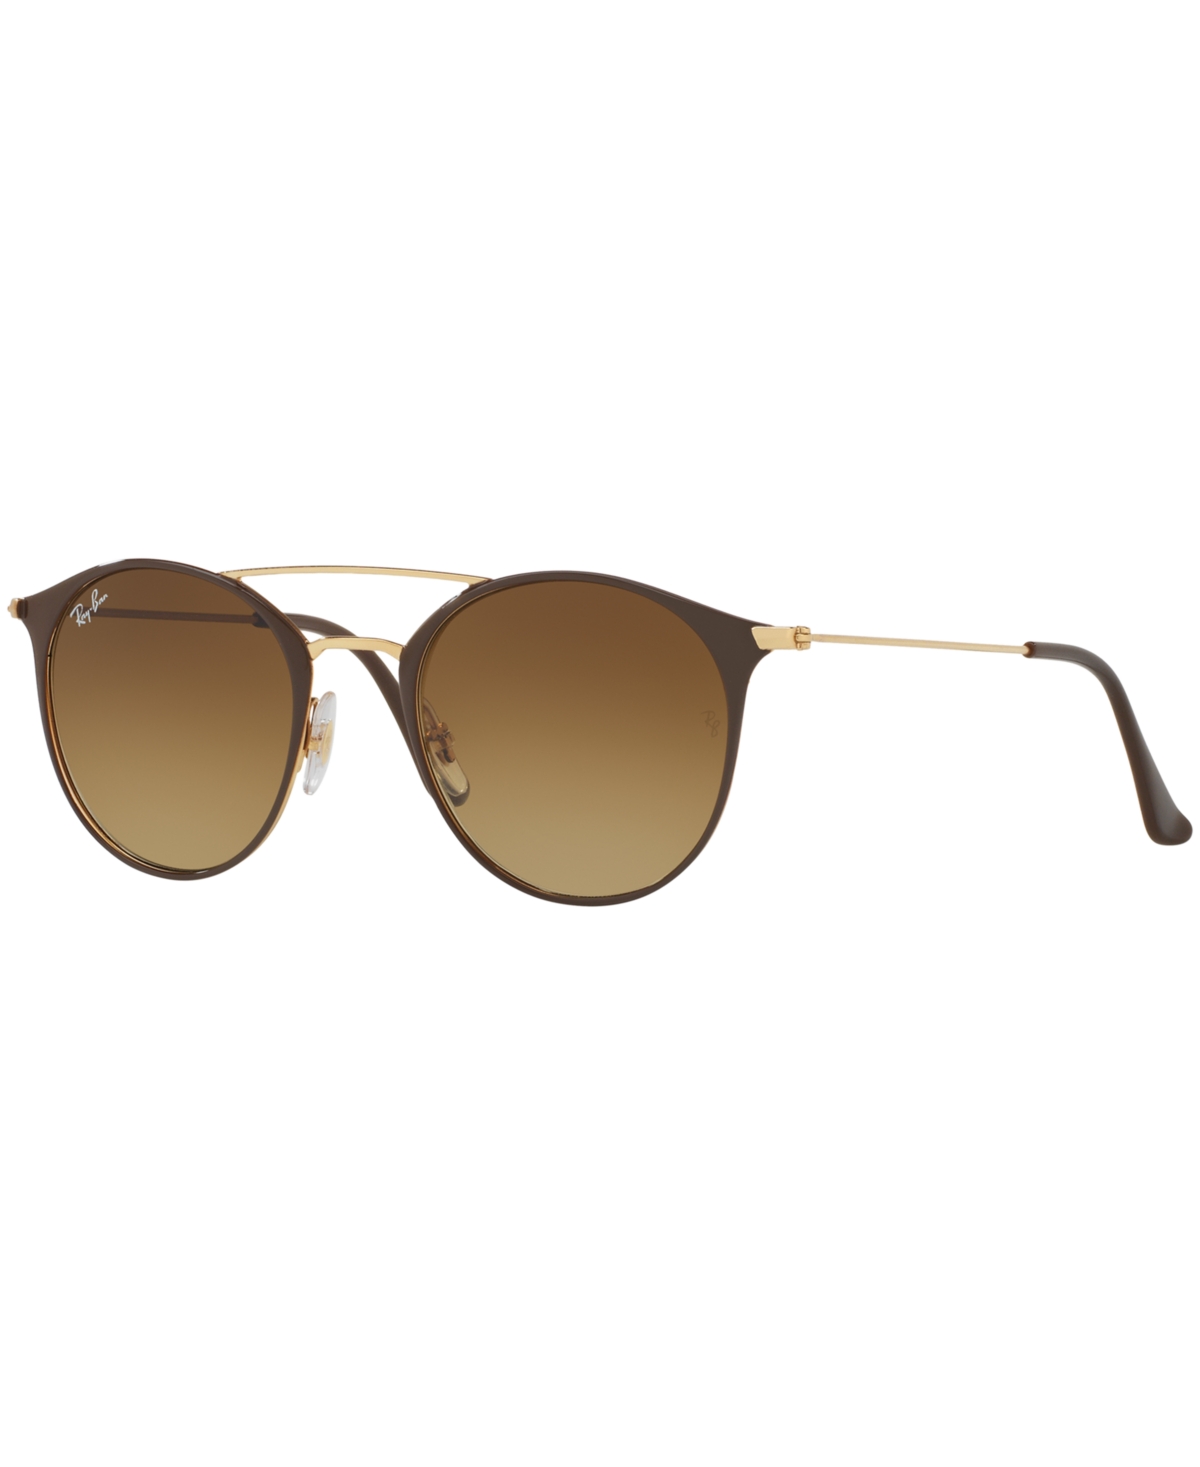 Ray Ban Unisex Sunglasses, Rb3546 52 In Brown,brown Gradient